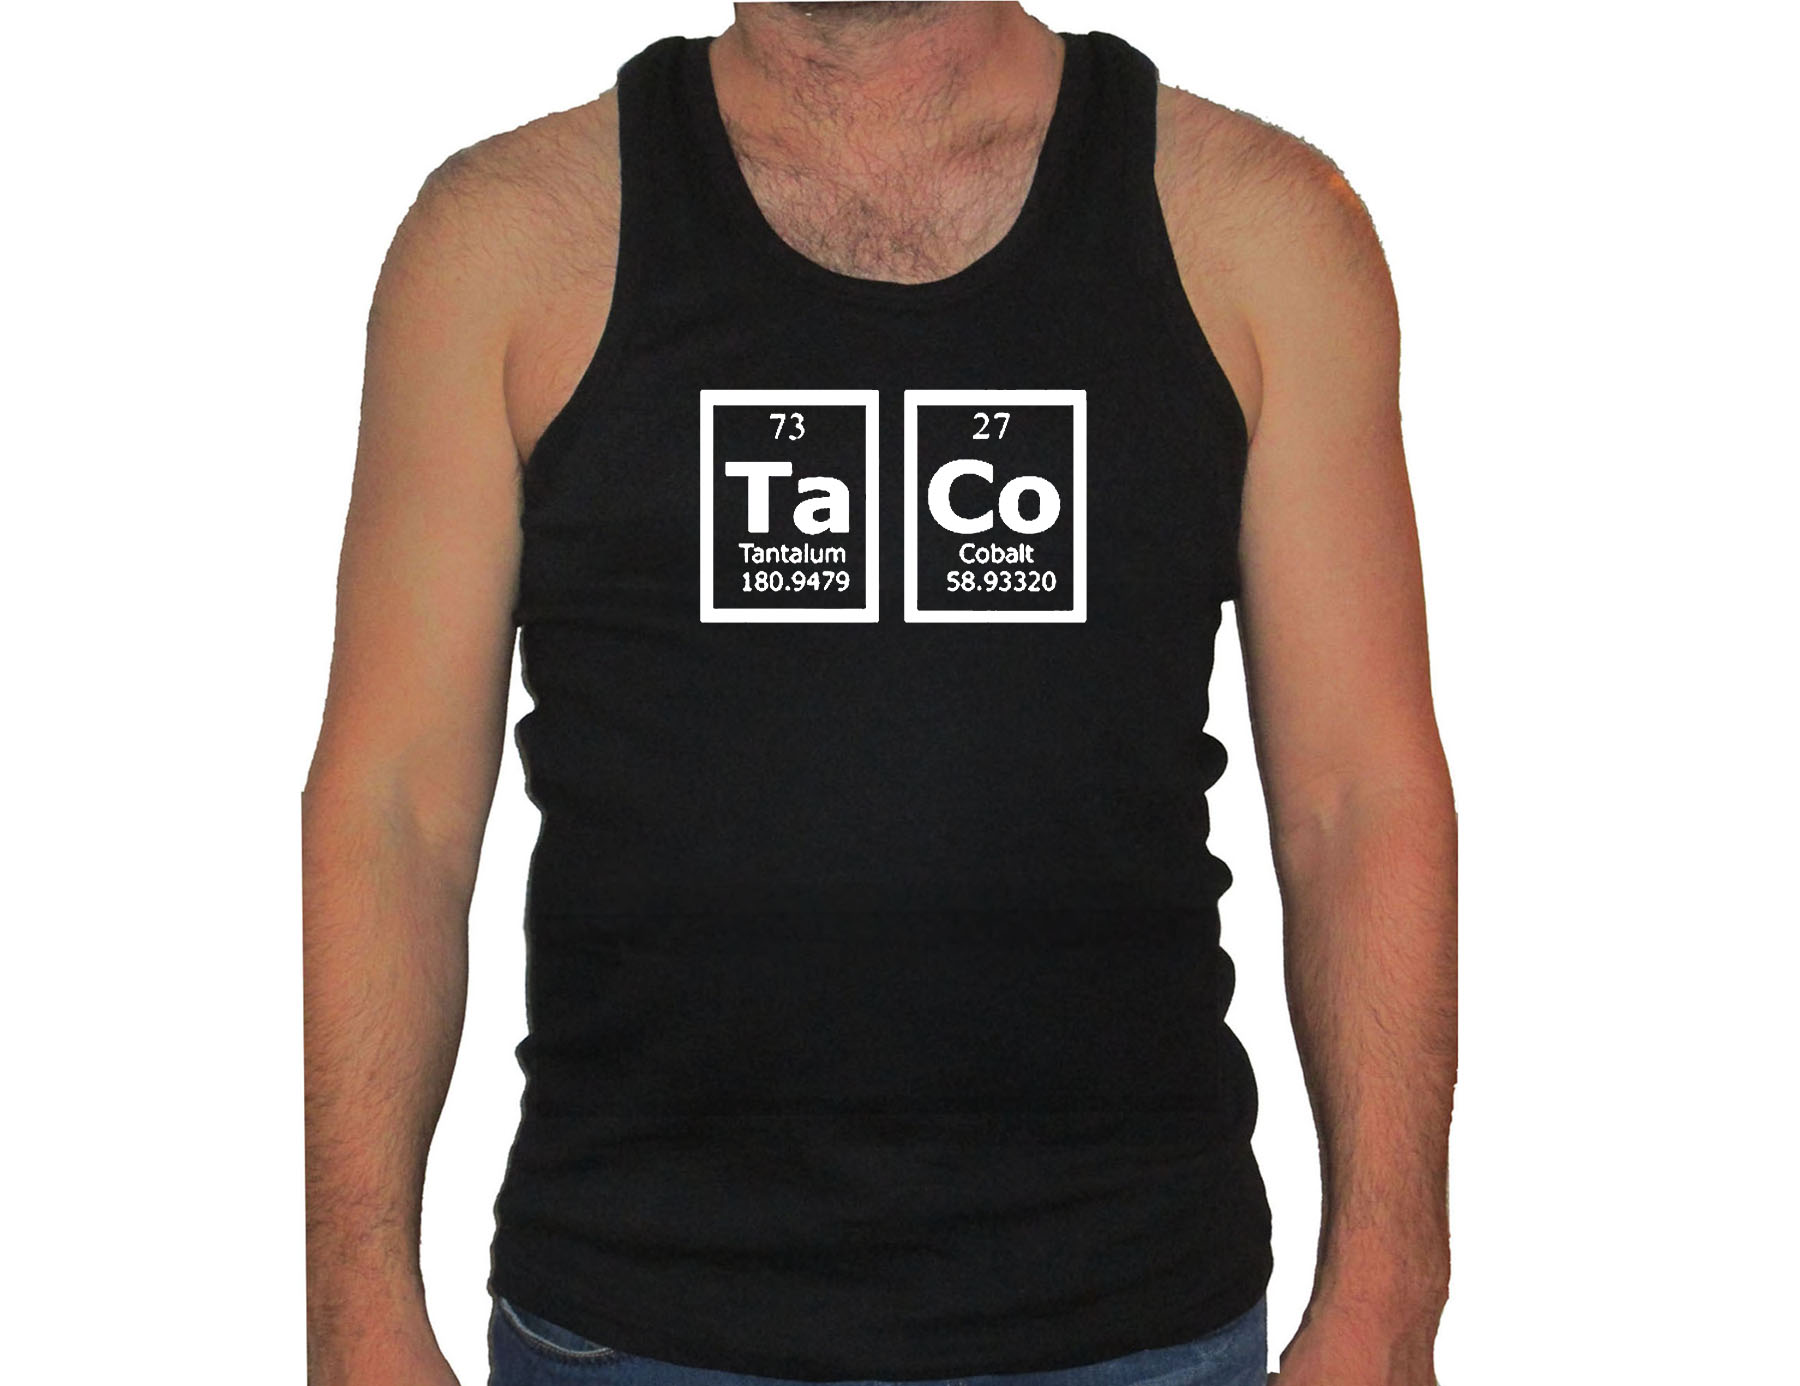 Taco periodic table of elements nerdy tank top